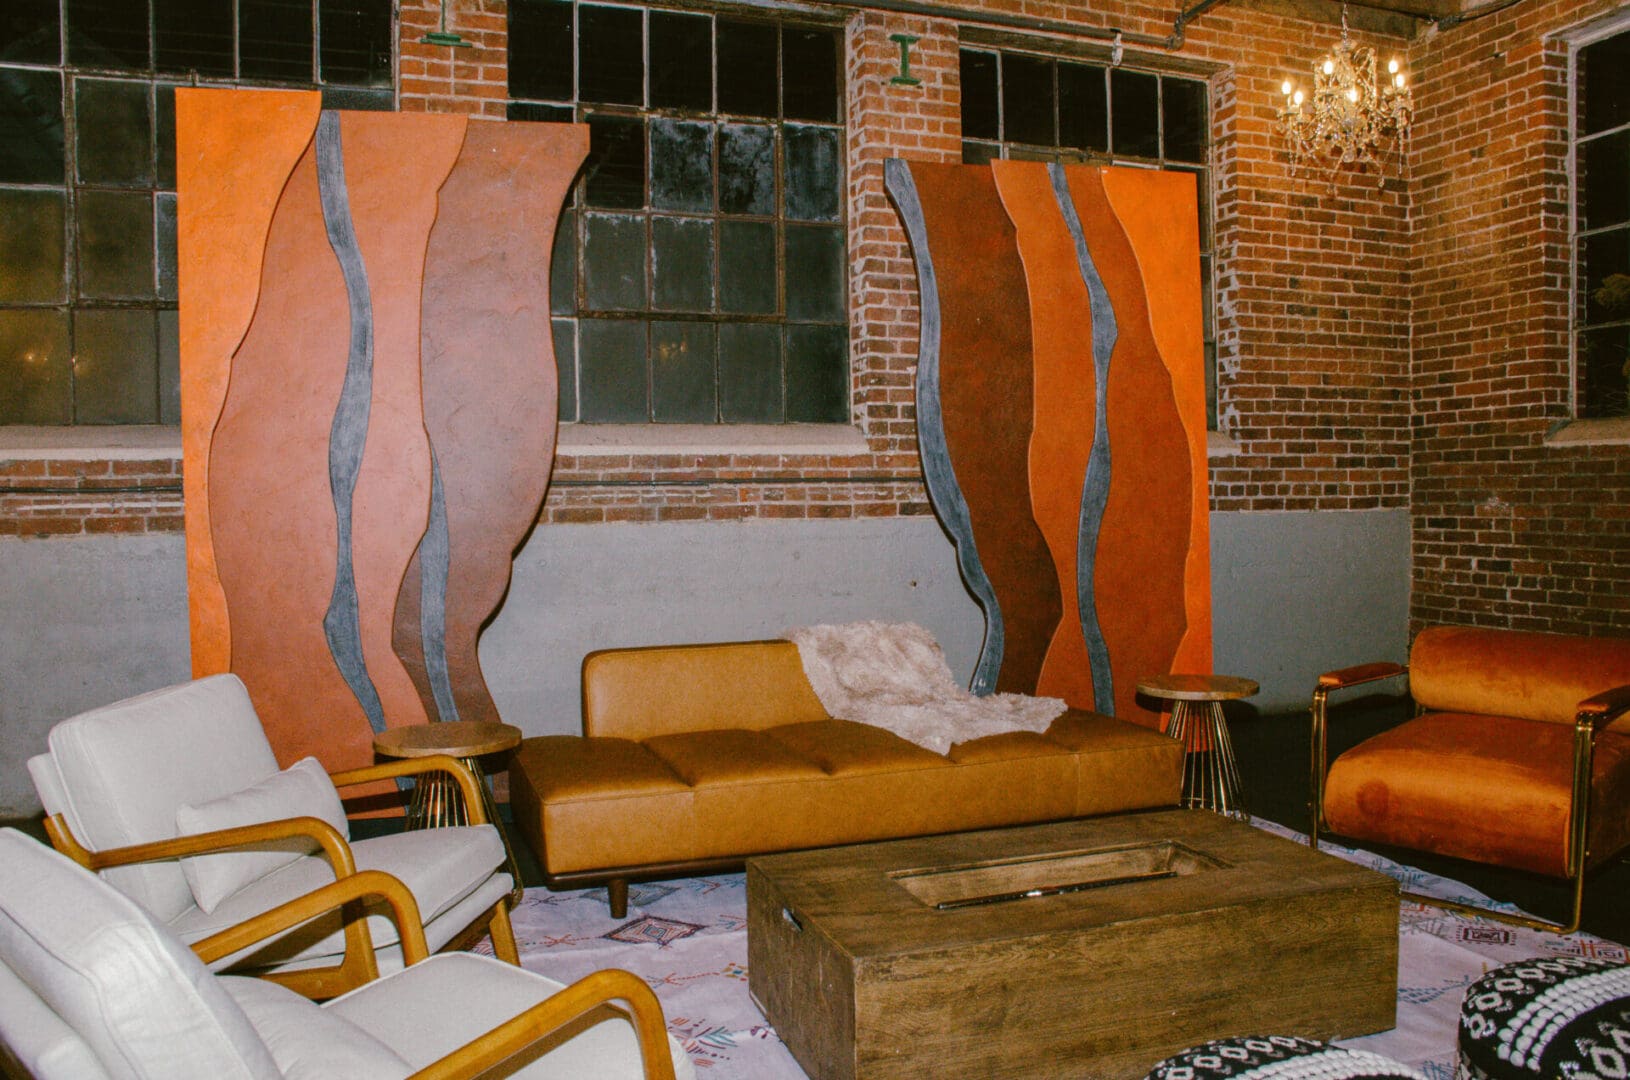 Vintage-style living room with a brown sofa, armchairs, and abstract wall art in an industrial space with Red Rocks Entrance Walls.